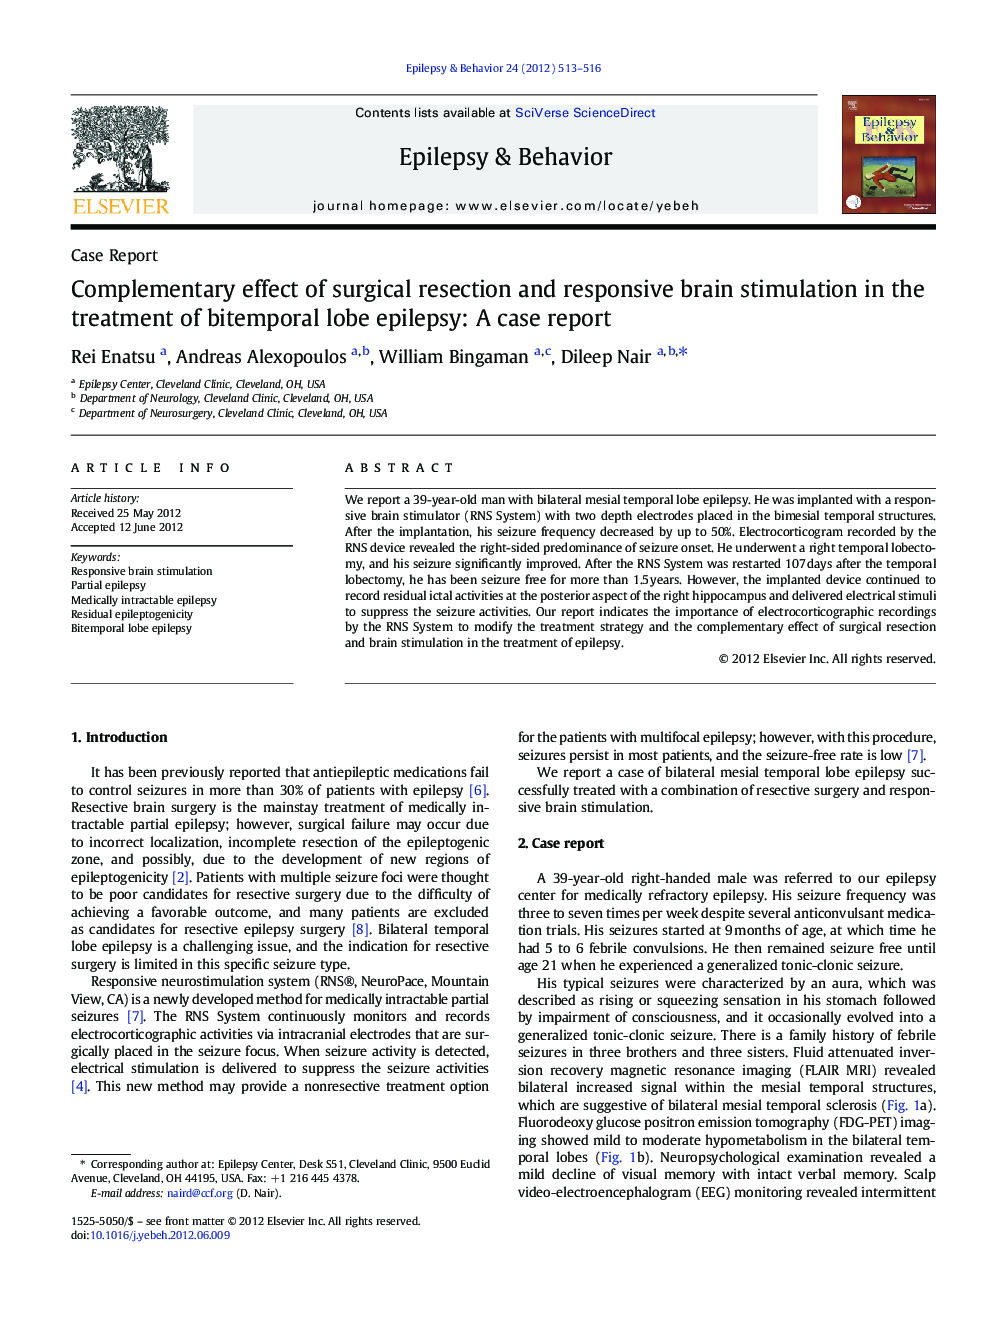 Complementary effect of surgical resection and responsive brain stimulation in the treatment of bitemporal lobe epilepsy: A case report